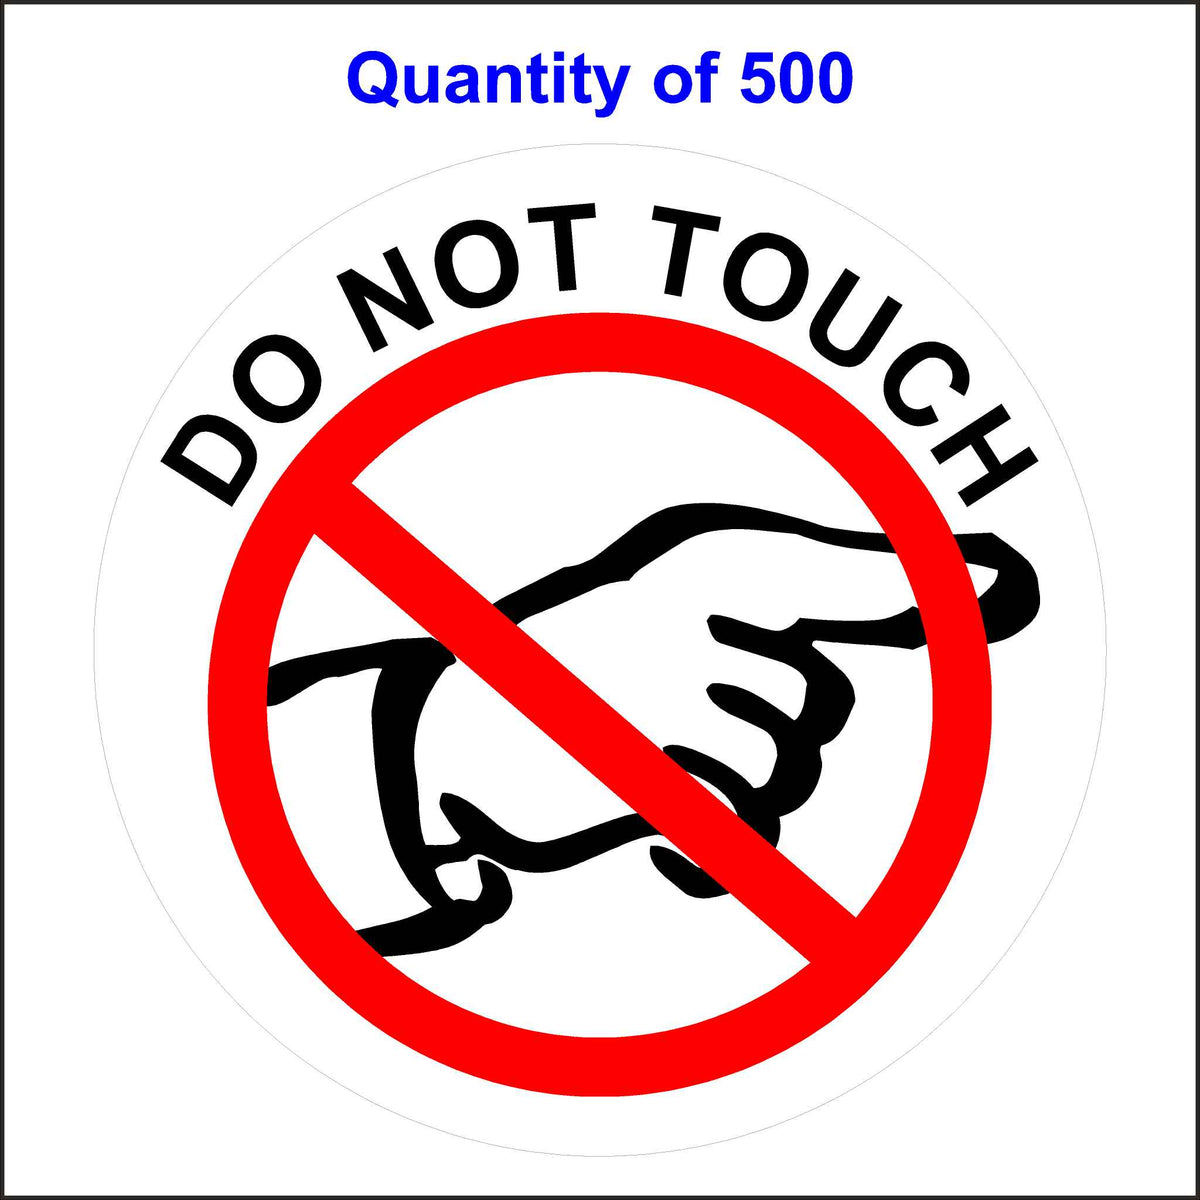 Do Not Touch Sticker With Finger Pointing. 500 Quantity.